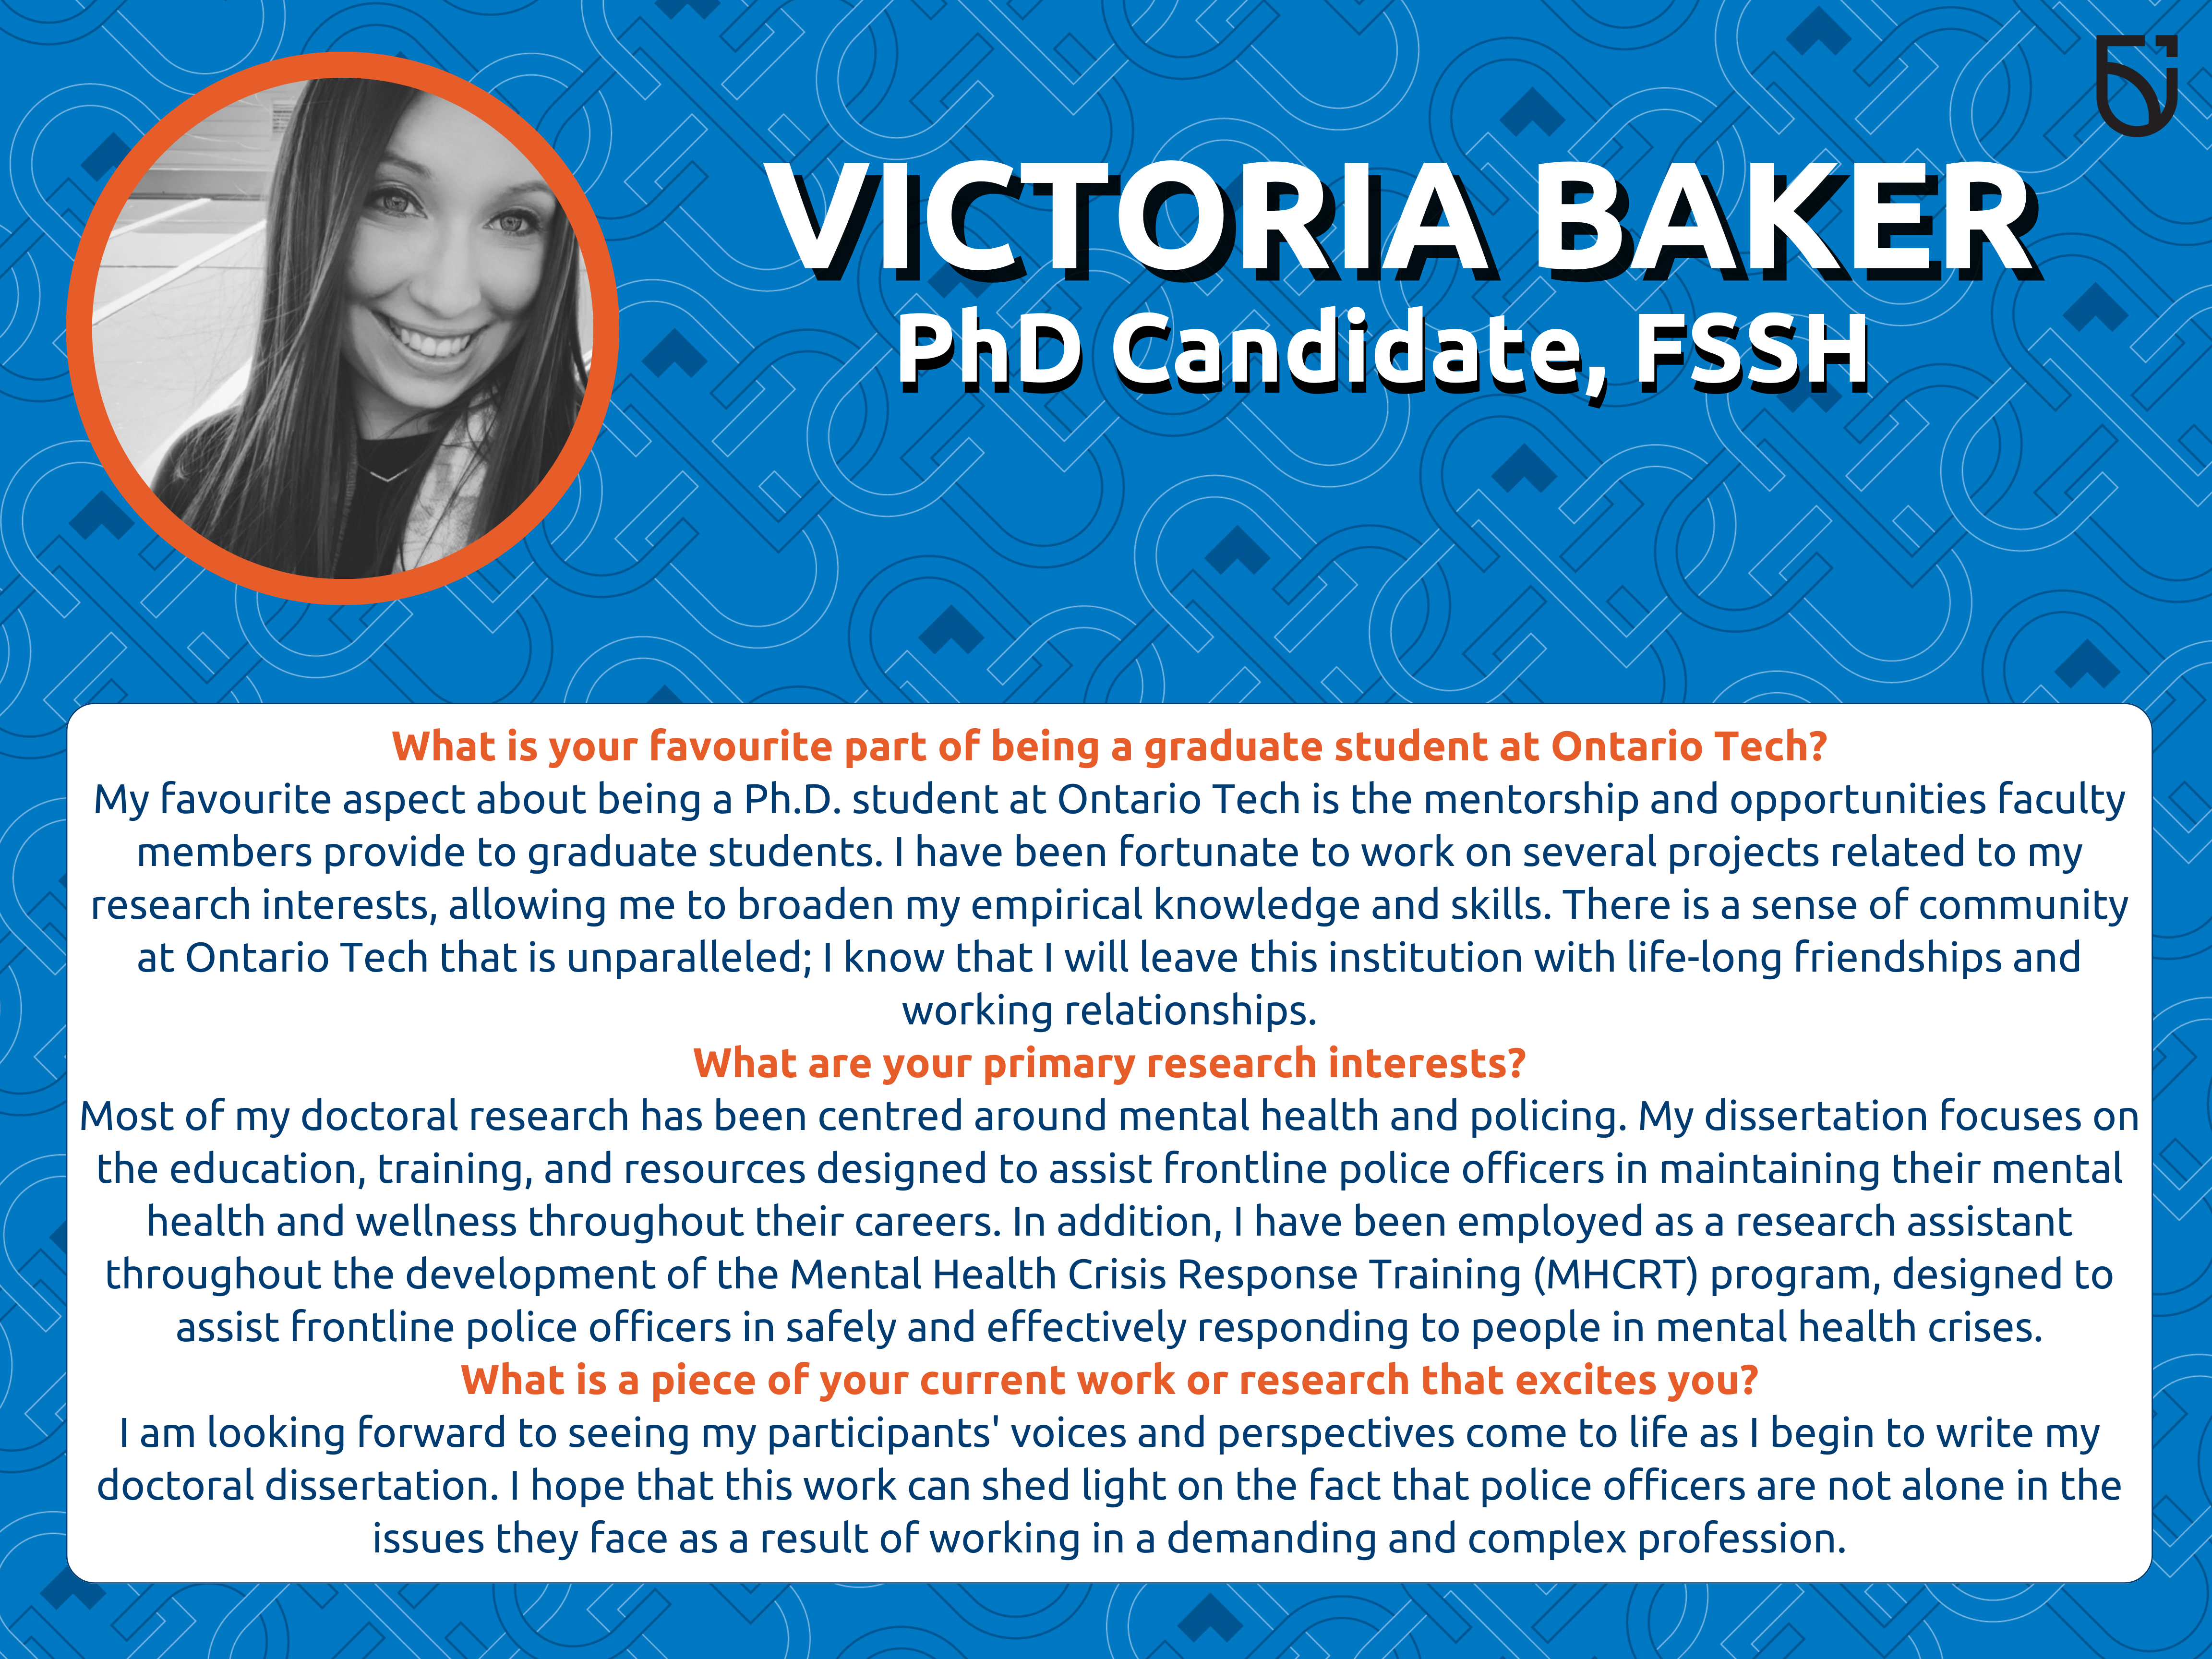 This photo is a Women’s Wednesday feature of Victoria Baker, a PhD Candidate in the Faculty of Social Science and Humanities